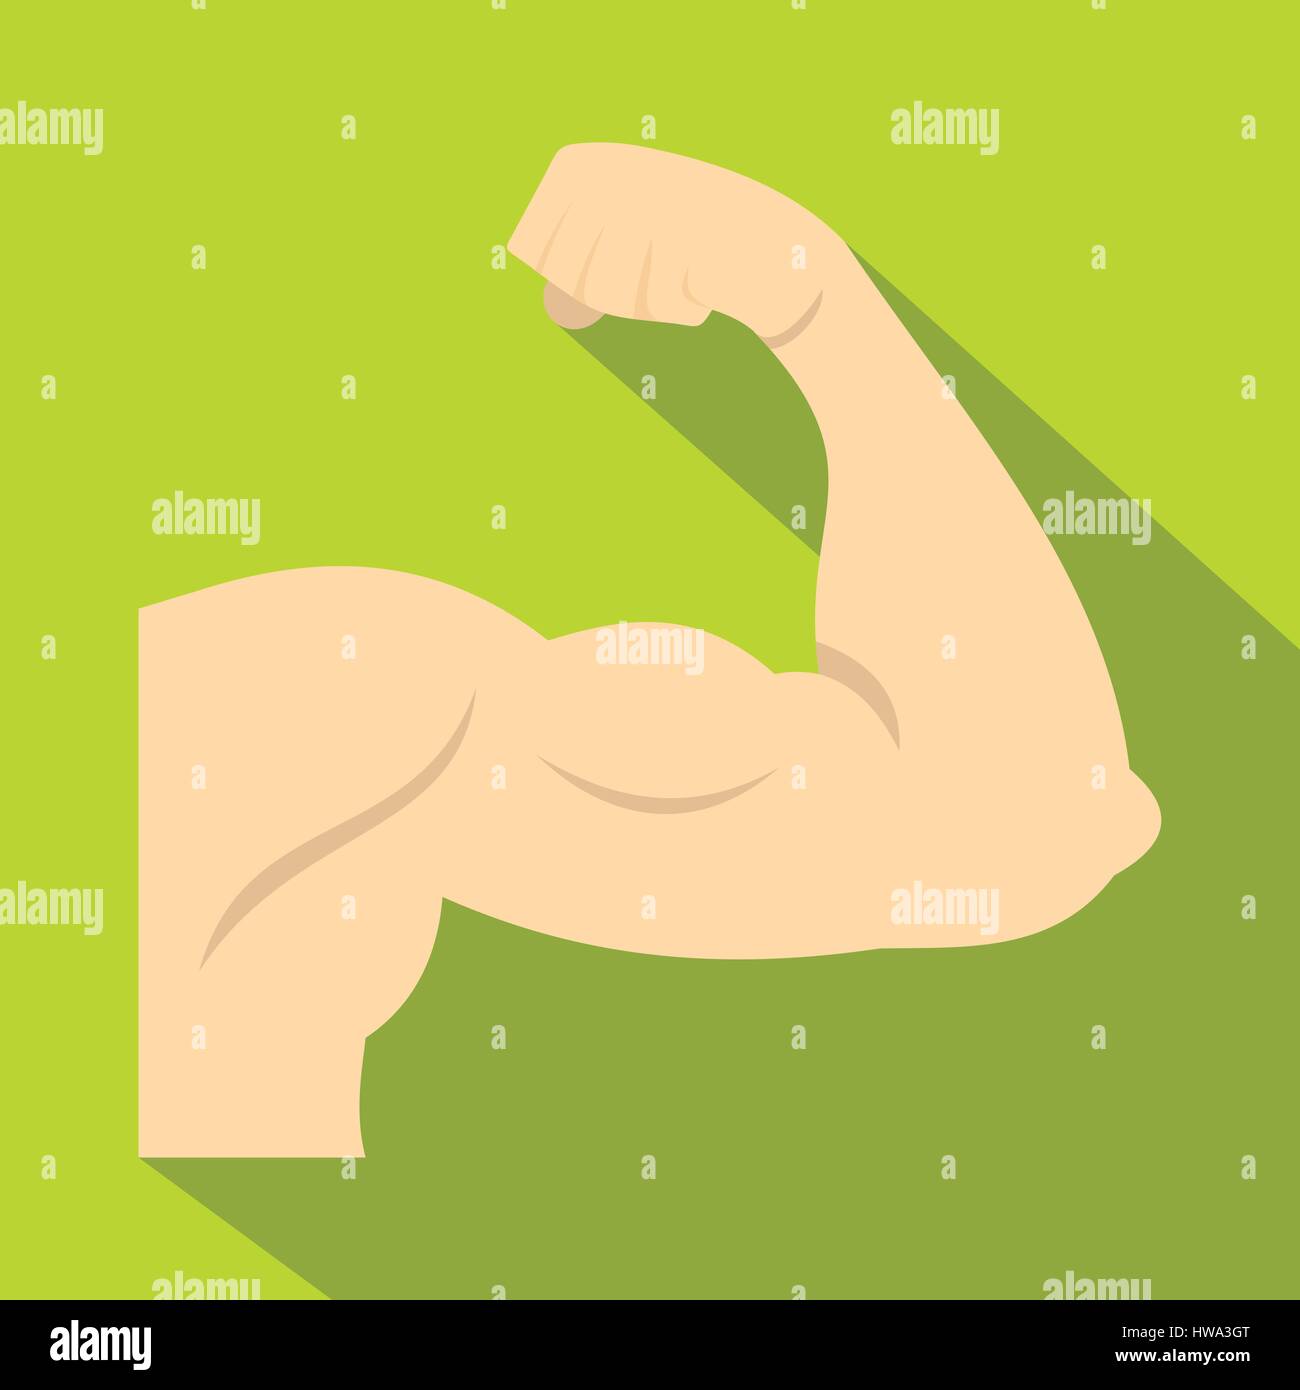 Girl showing biceps Stock Vector Images - Alamy